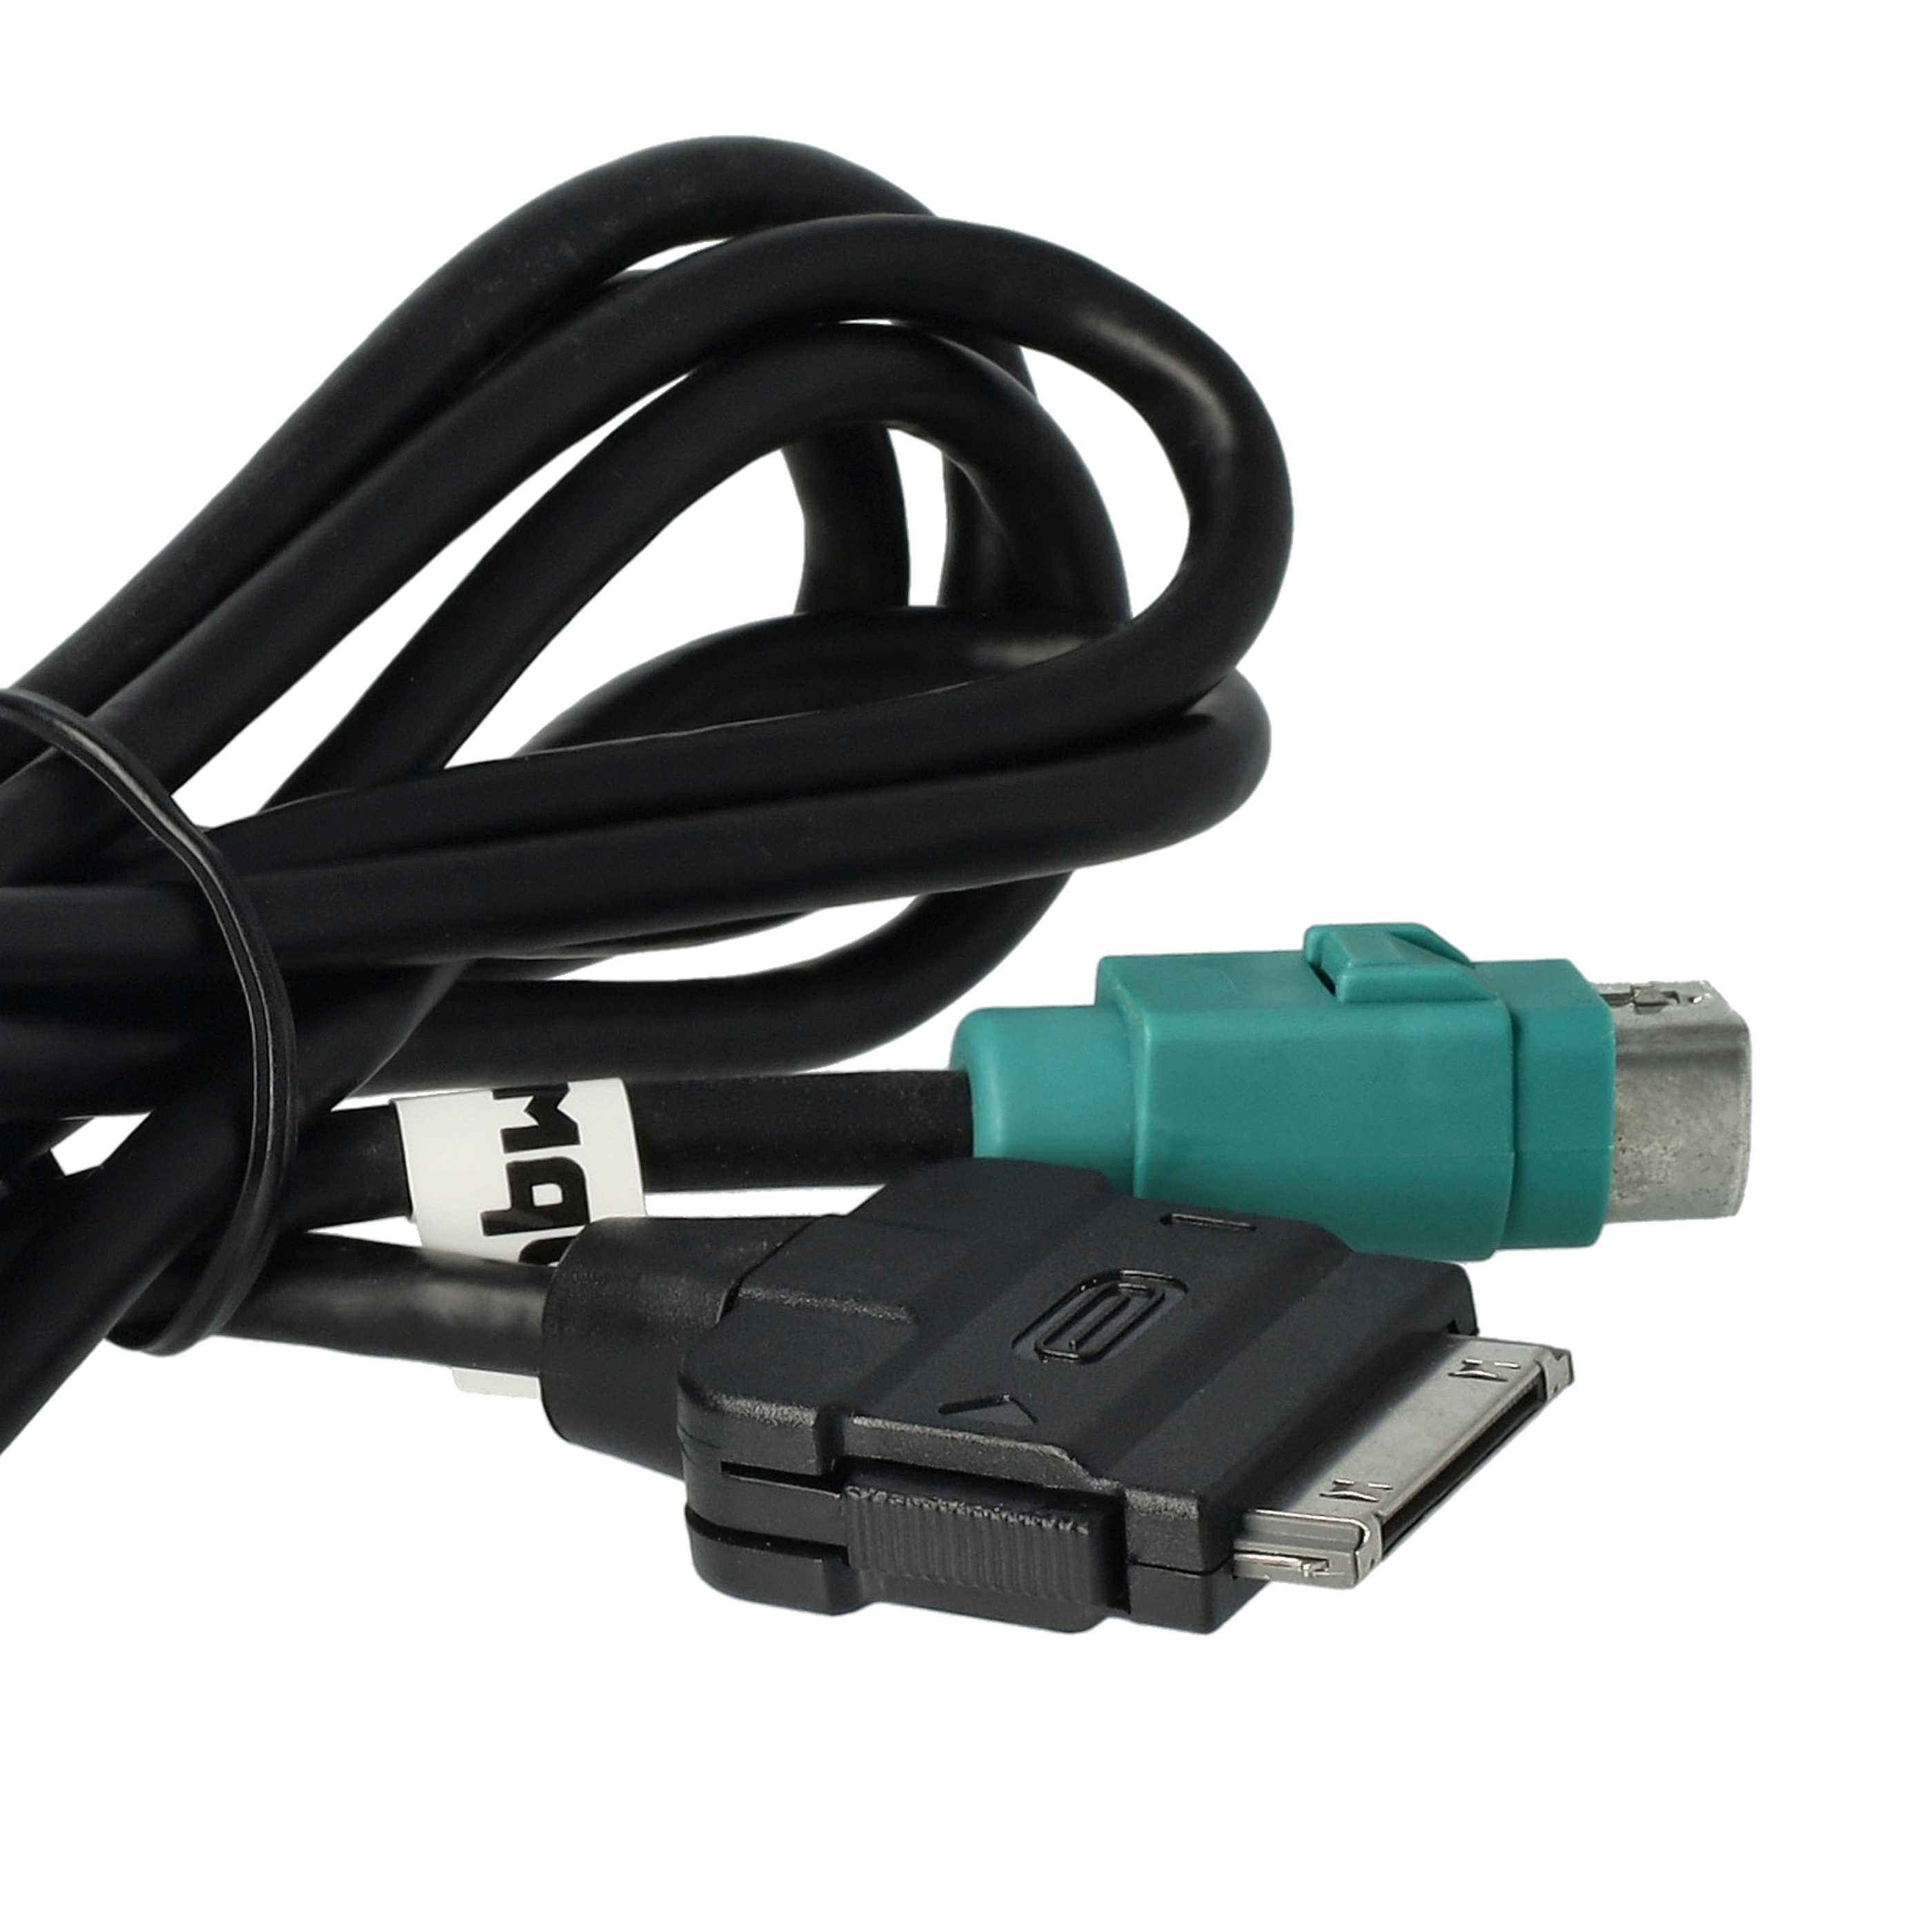 Audio Cable replaces Alpine KCE-422i for Alpine Car, Vehicle - 100 cm long